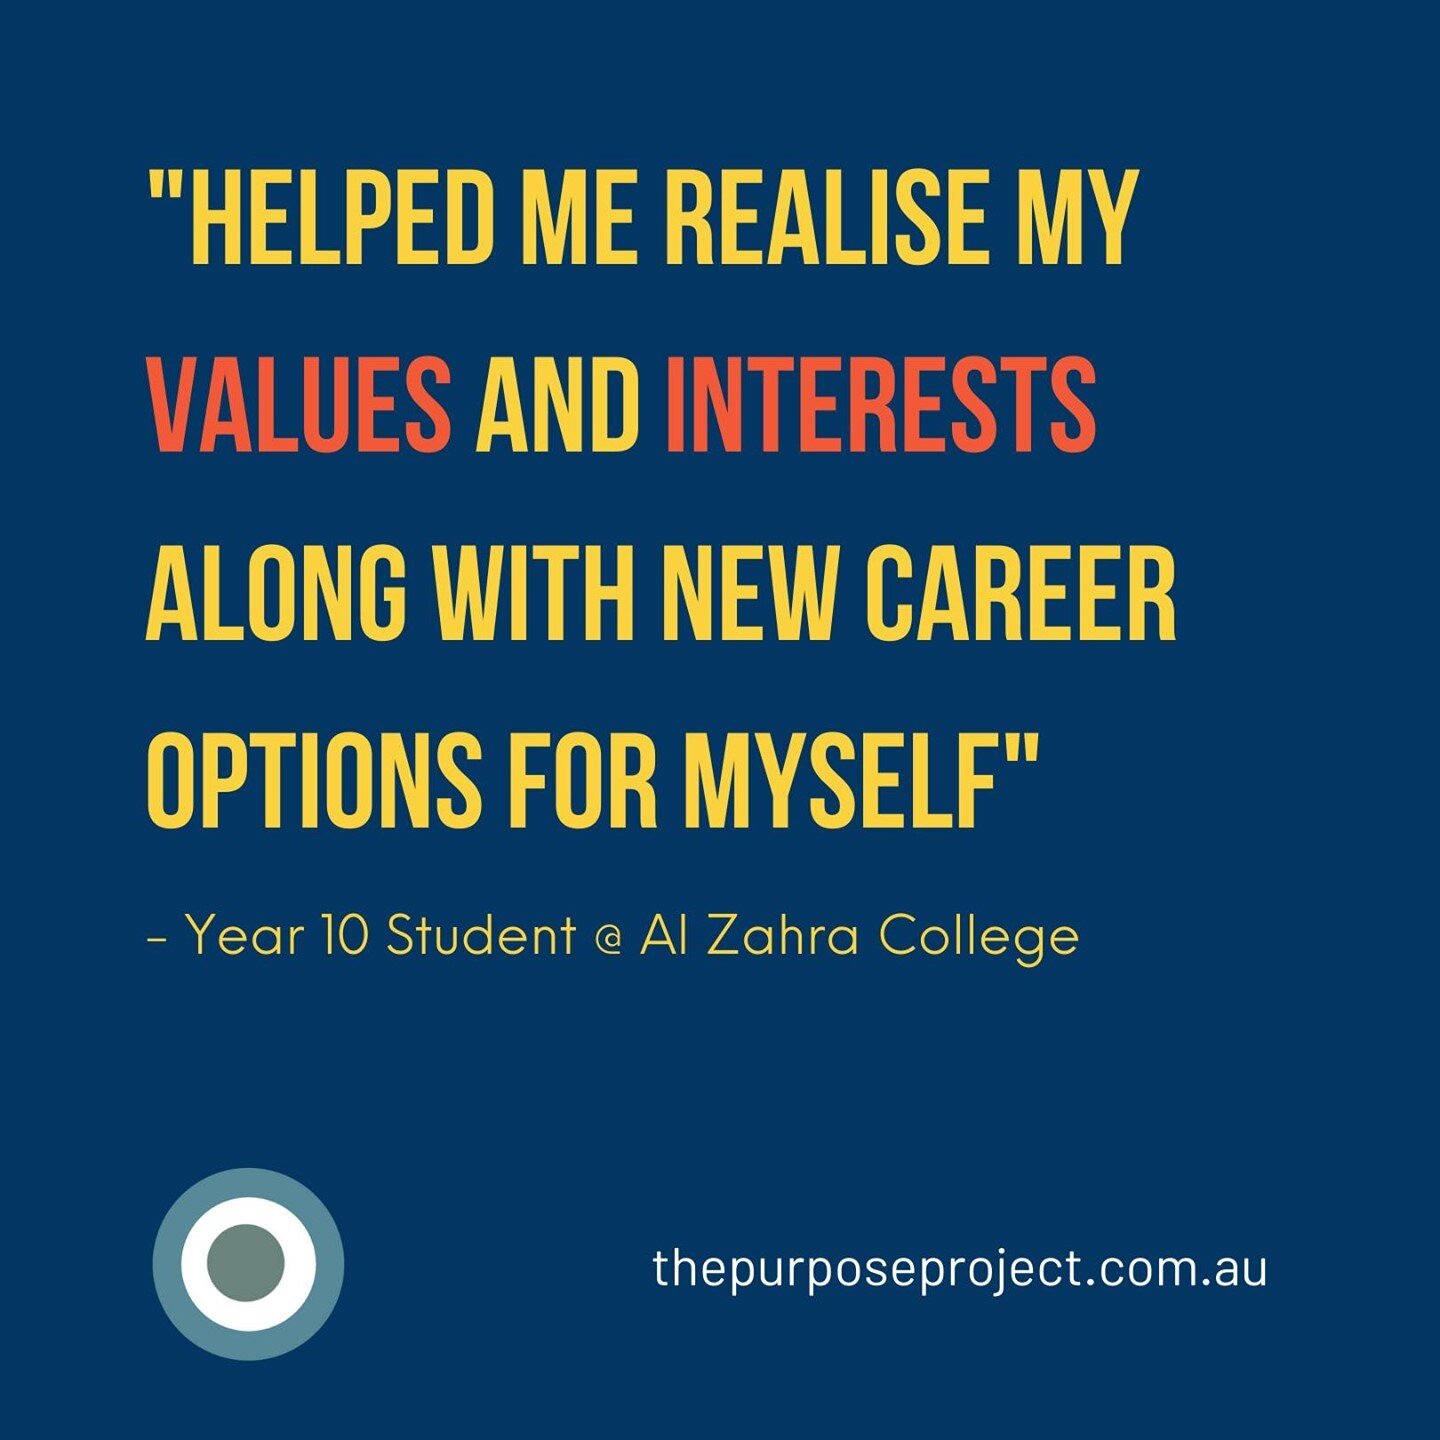 Student feedback after a Life Design course that ran at Al Zahra College. ⁠
⁠
Imagine if all young people were able to connect to their values and interests. What might be possible?⁠
⁠
Realising your values and interests goes beyond just finding new 